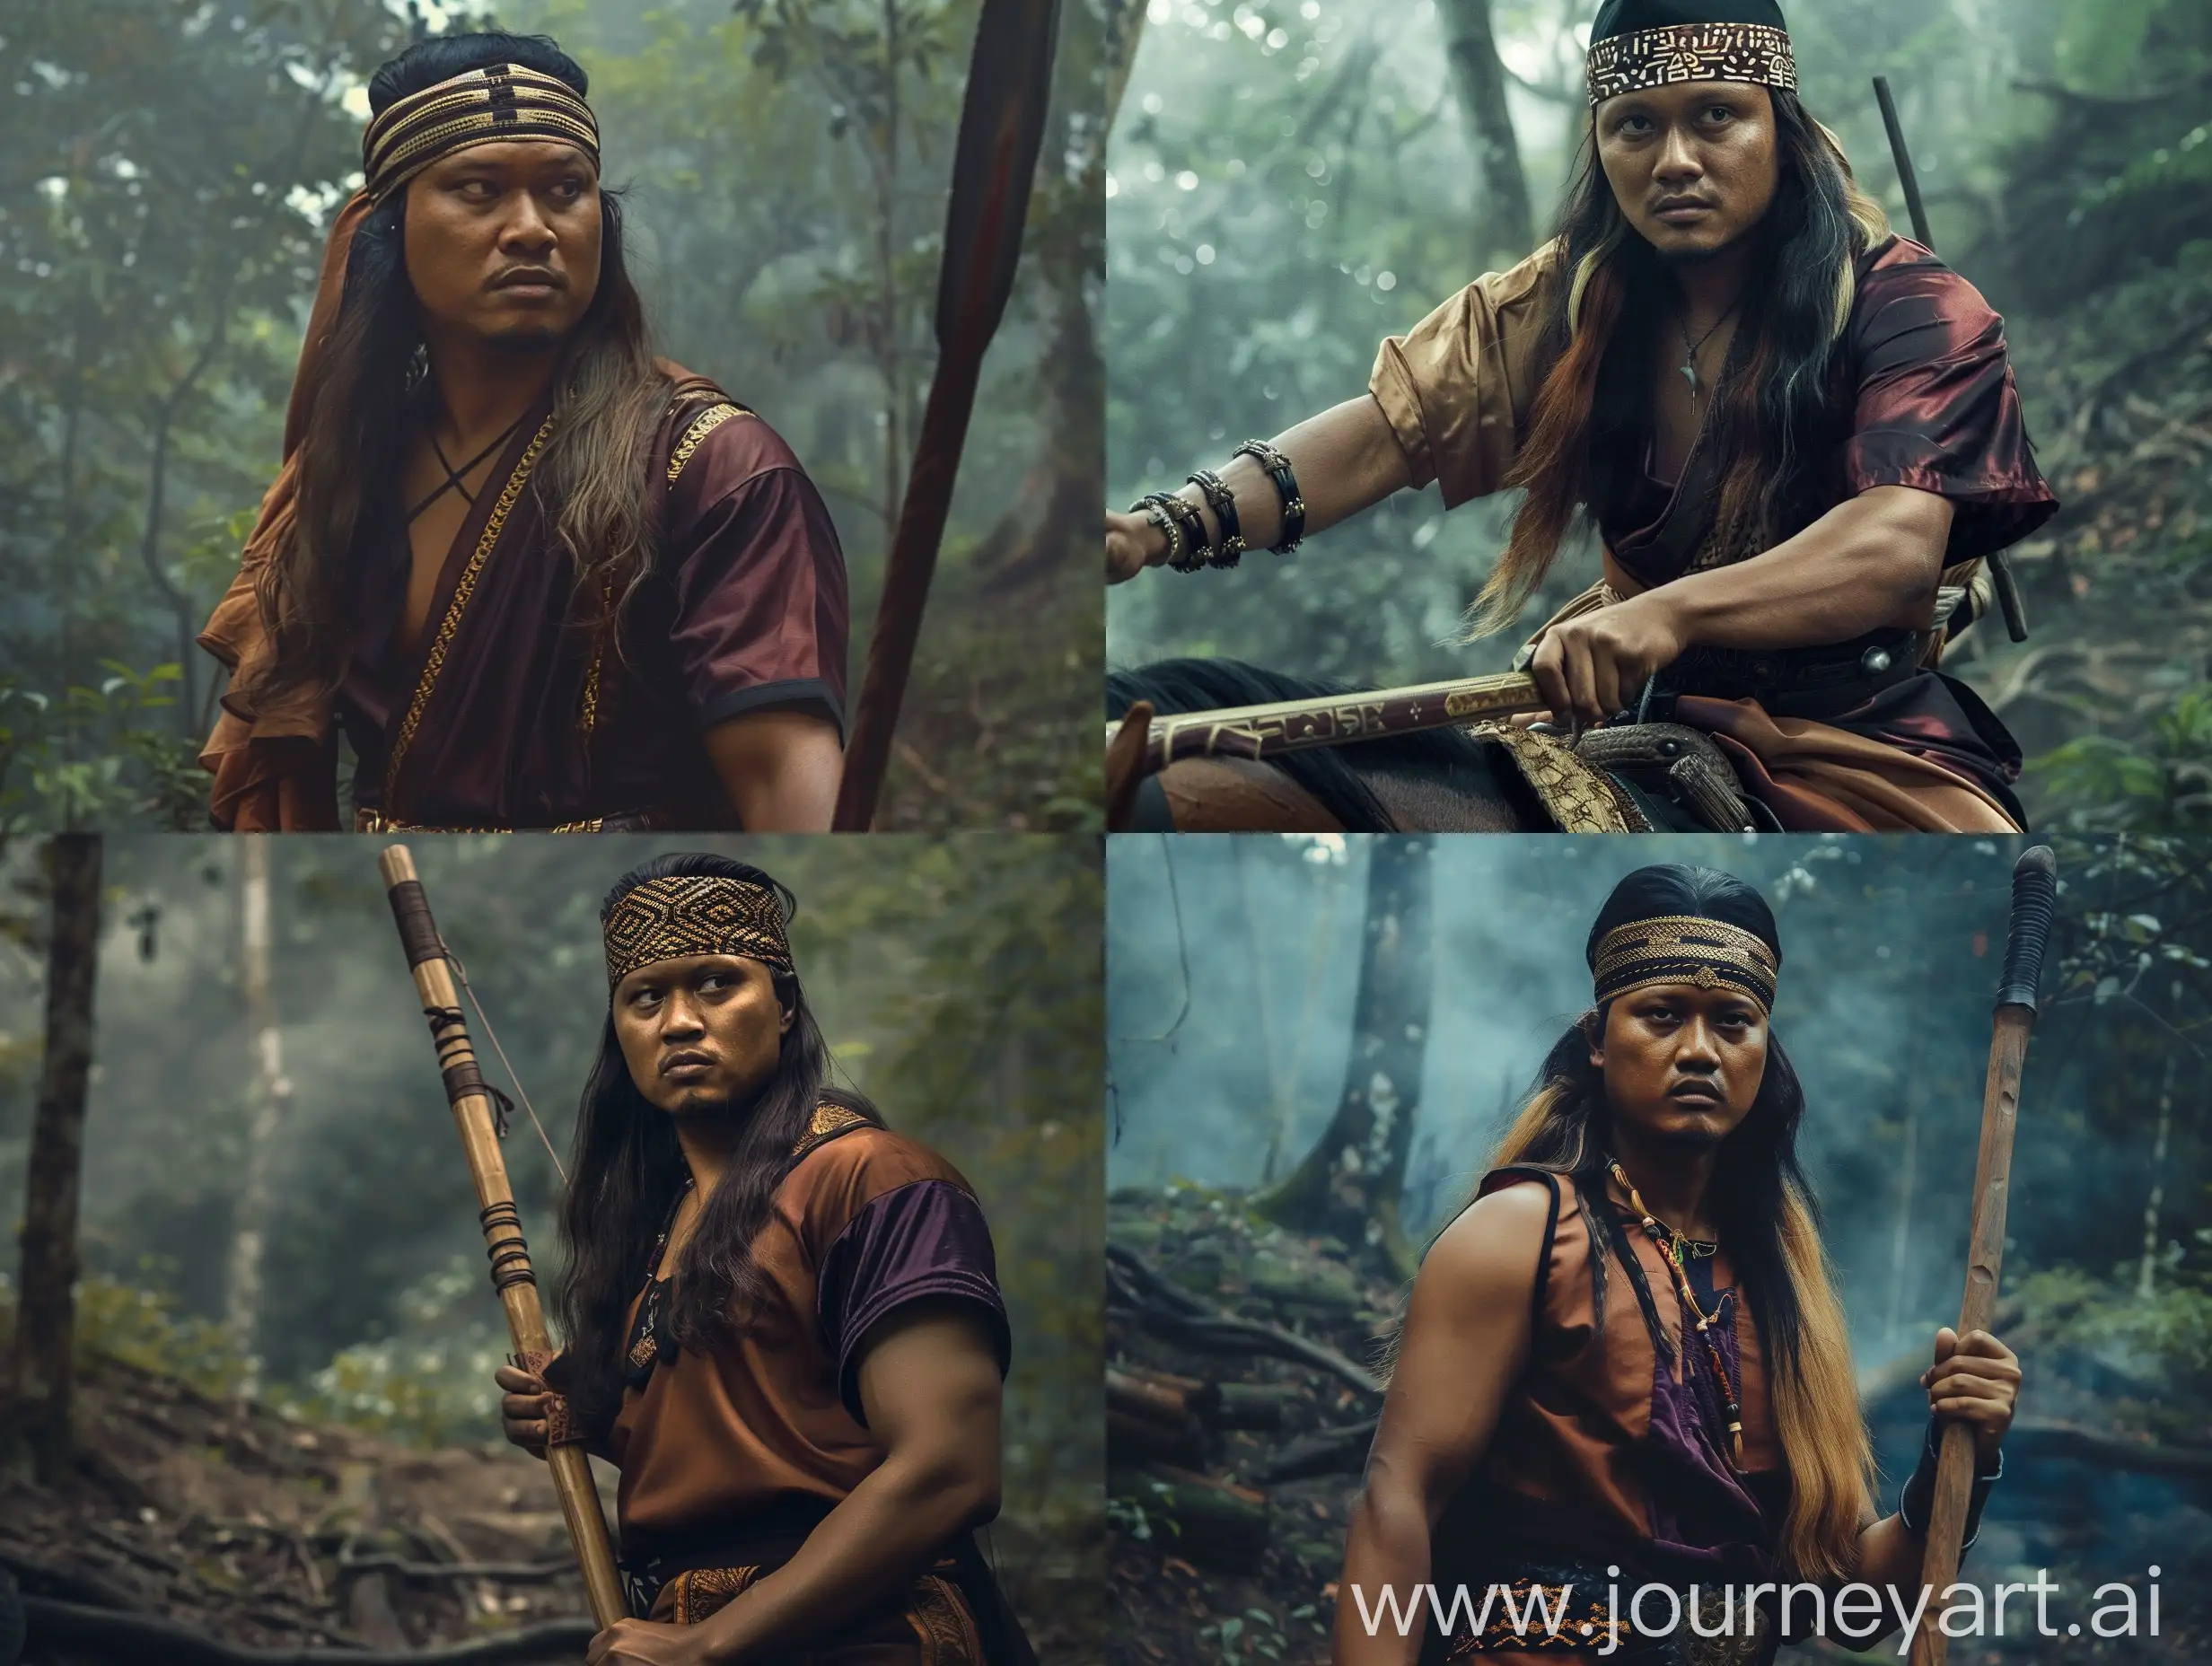 A soldier from the Indonesian Majapahit Kingdom, long hair, wearing a headband made of batik cloth, wearing brown clothes, he is holding a staff. he was riding in the middle of a dense forest. With a facial expression full of determination and traditional clothing that reflects strength and honor, on his back is a sword ready to face any challenge. The misty forest backdrop provides a mysterious and epic feel, adding to the impression that the warrior is on an important mission to protect his kingdom.